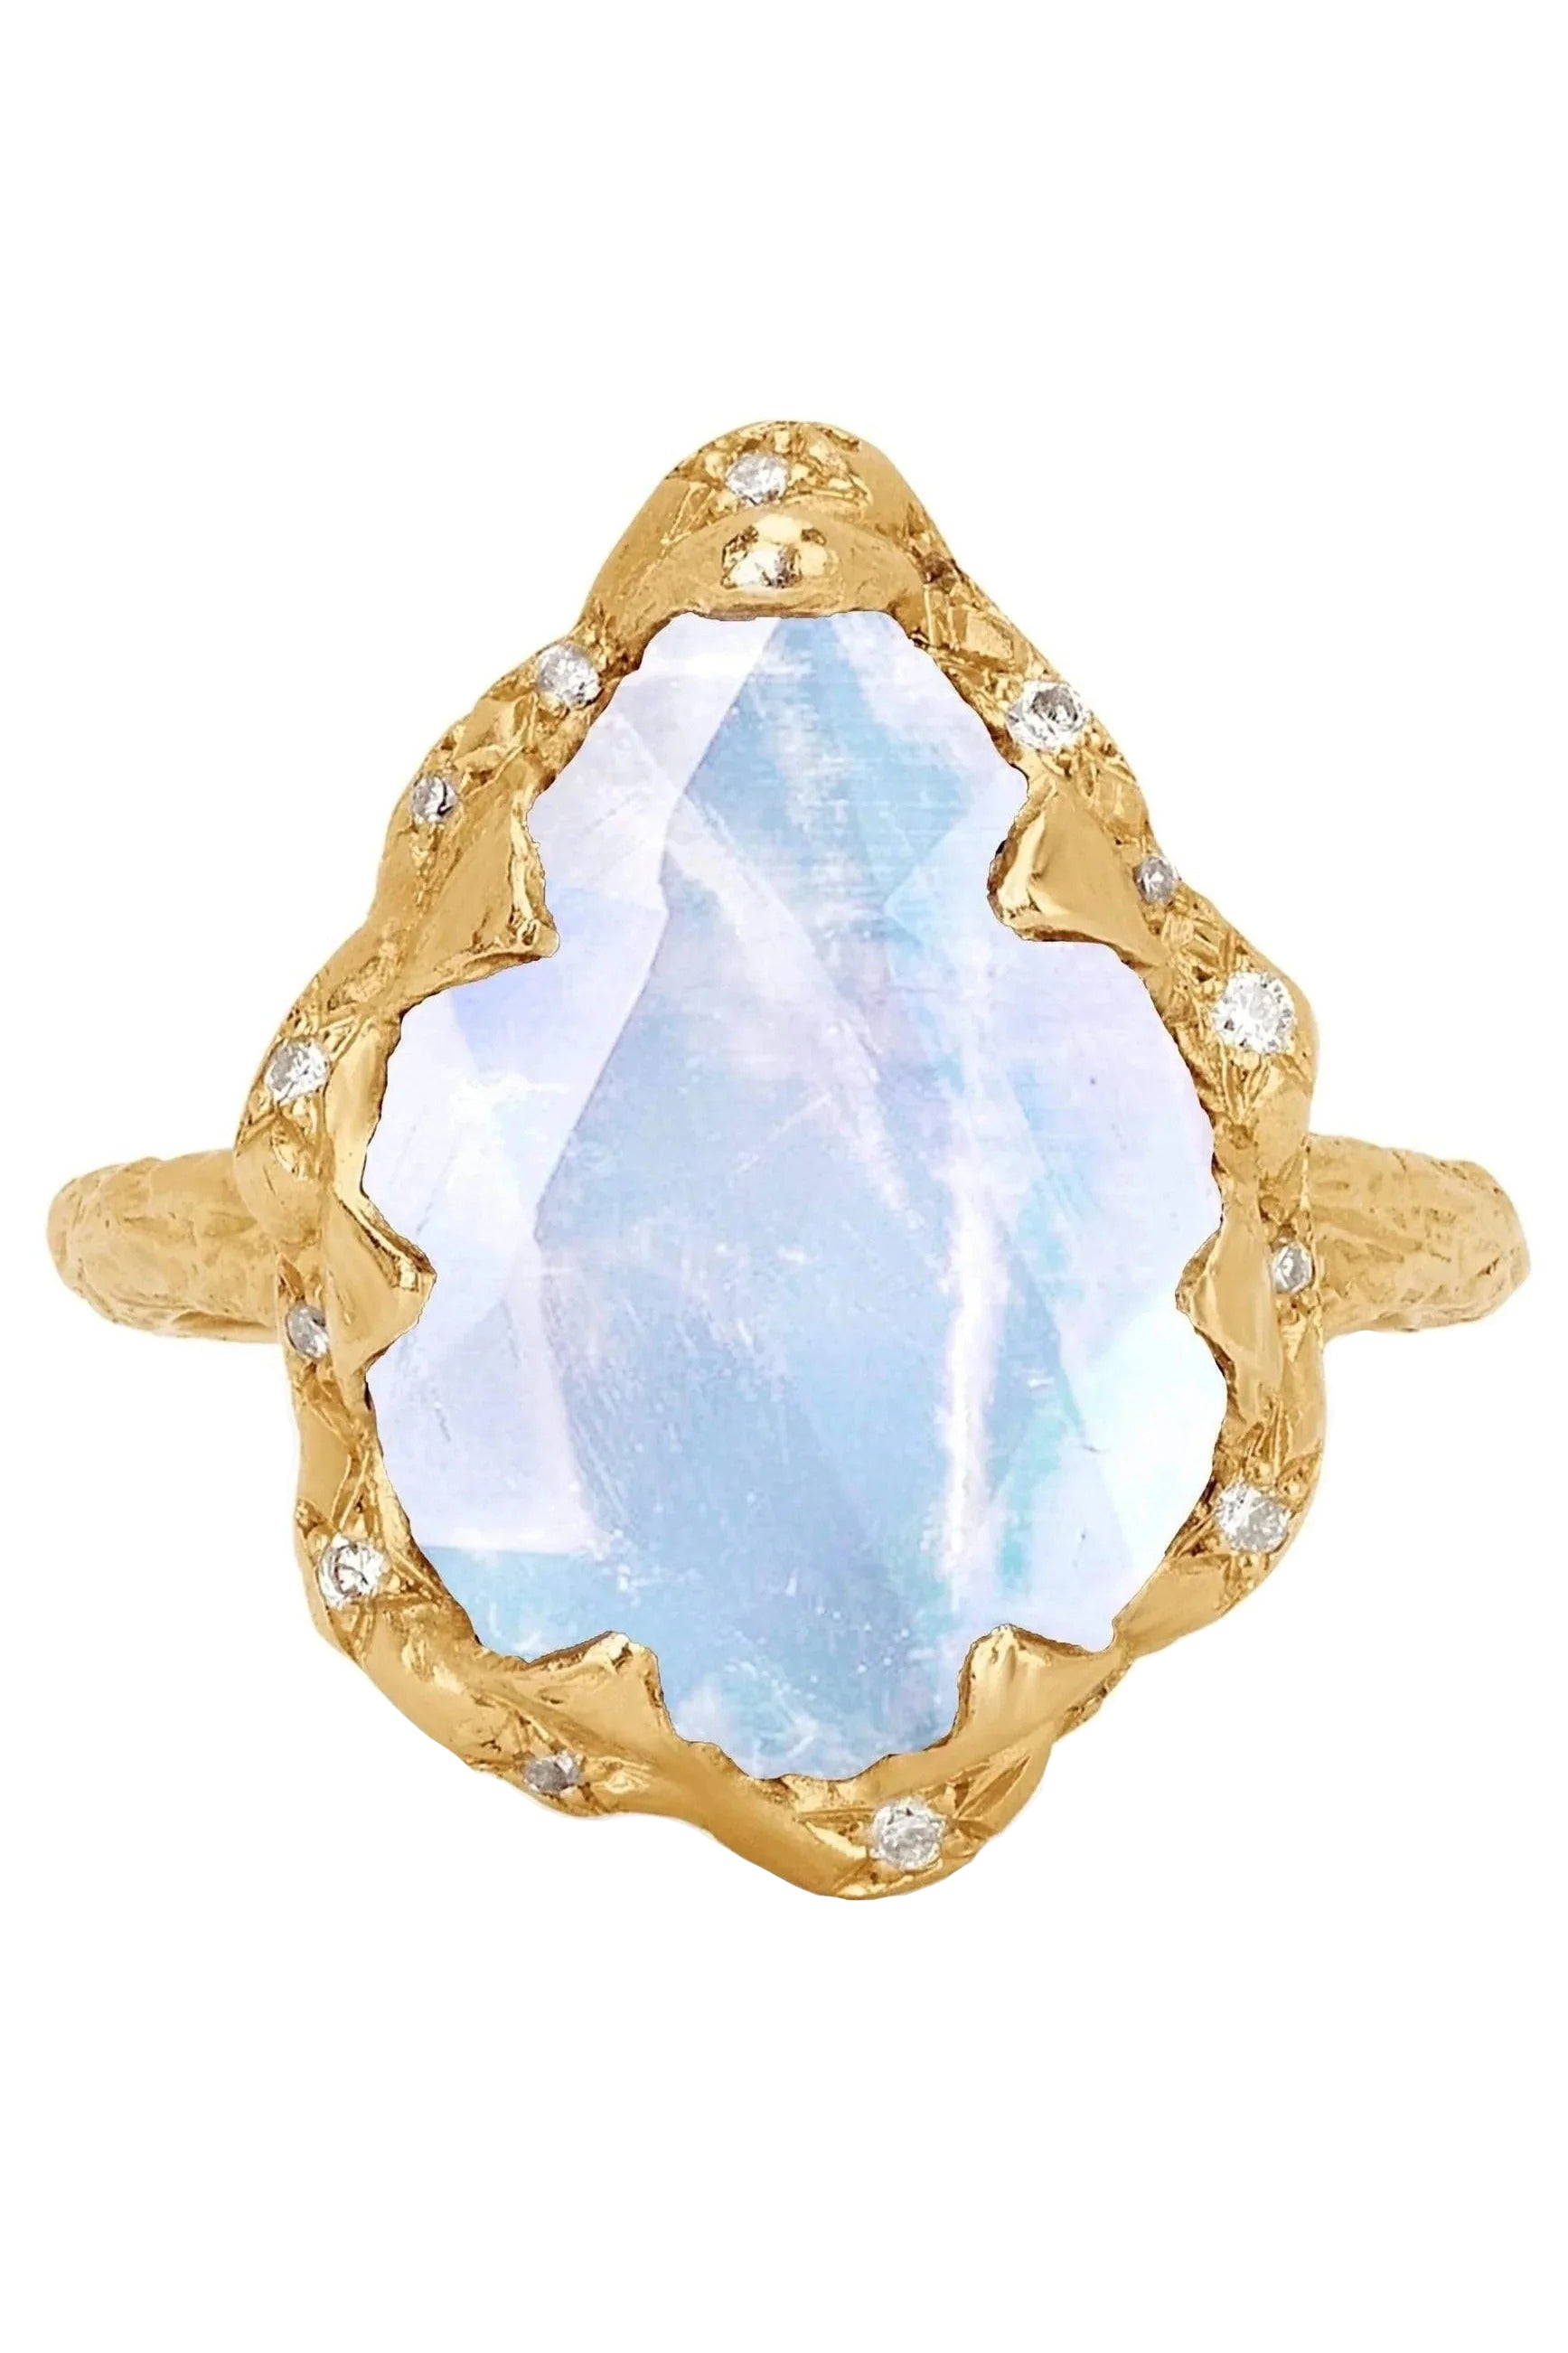 LOGAN HOLLOWELL-Queen Moonstone Ring with Sprinkled Diamonds-